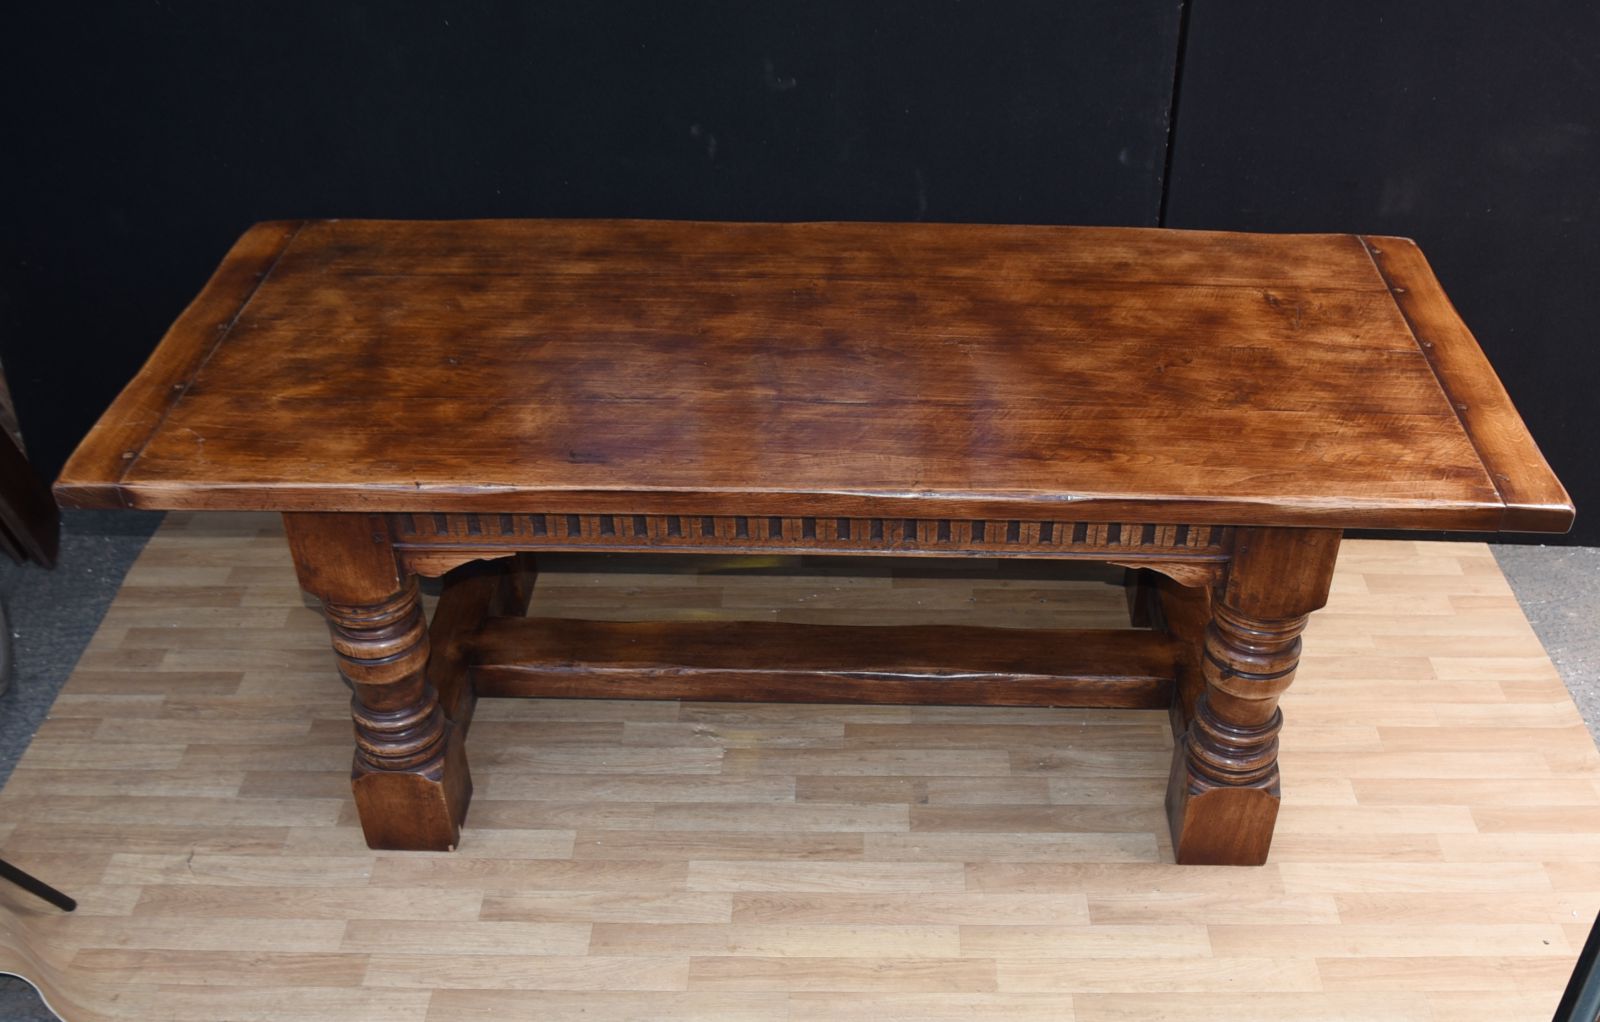 Classic oak refectory table with hand carved apron with gothic arch motifs